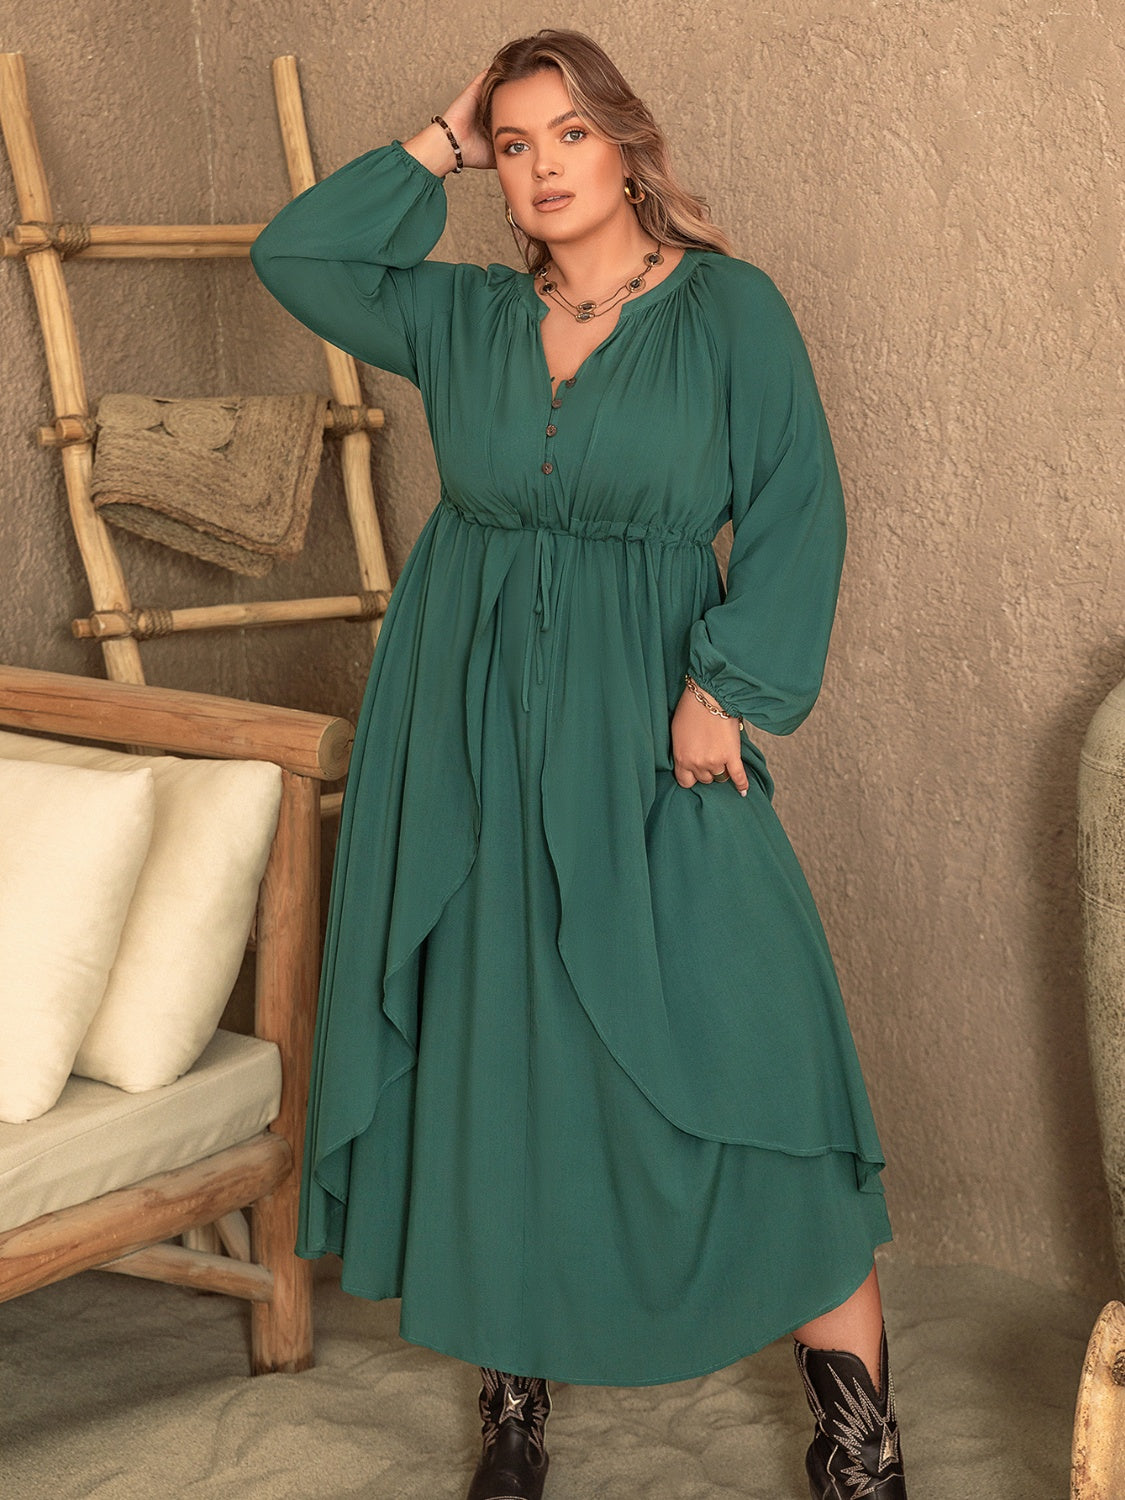 Plus Size Layered Balloon Sleeve Midi Dress for Women Over 50 - Perfect for Summer Beach Wedding Guest Parties